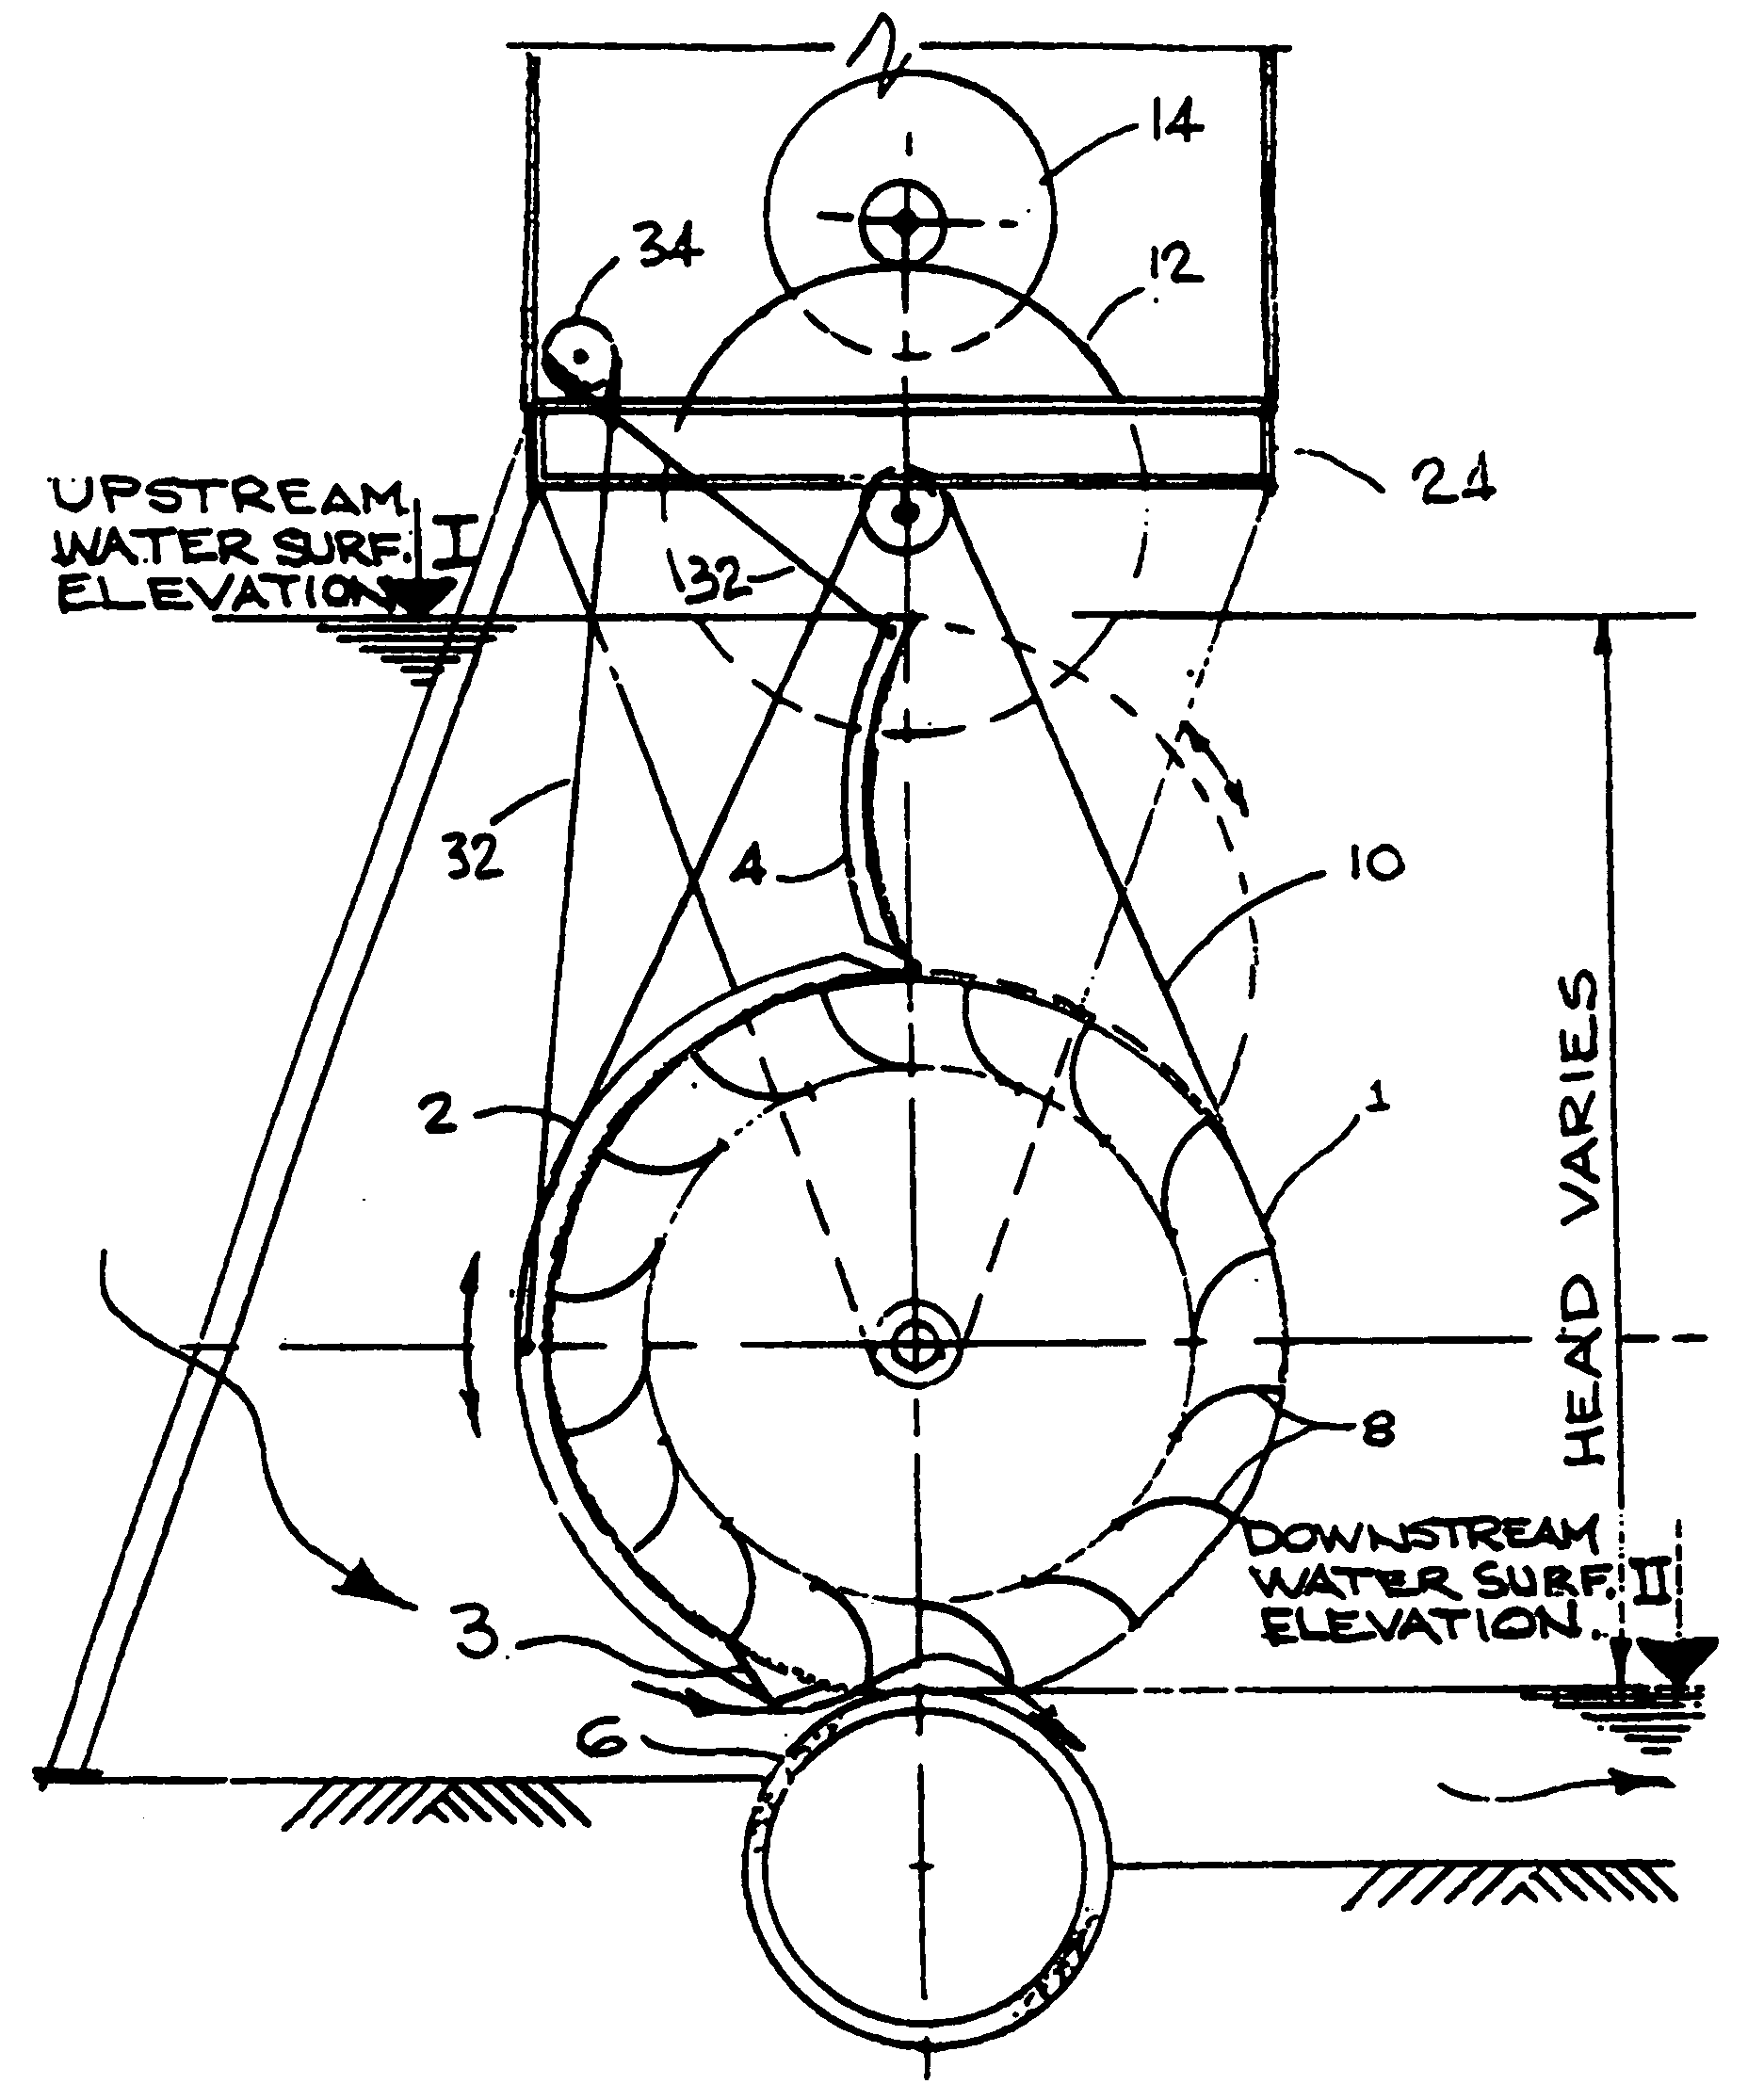 Undershot impulse jet driven water turbine having an improved vane configuration and radial gate for optimal hydroelectric power generation and water level control